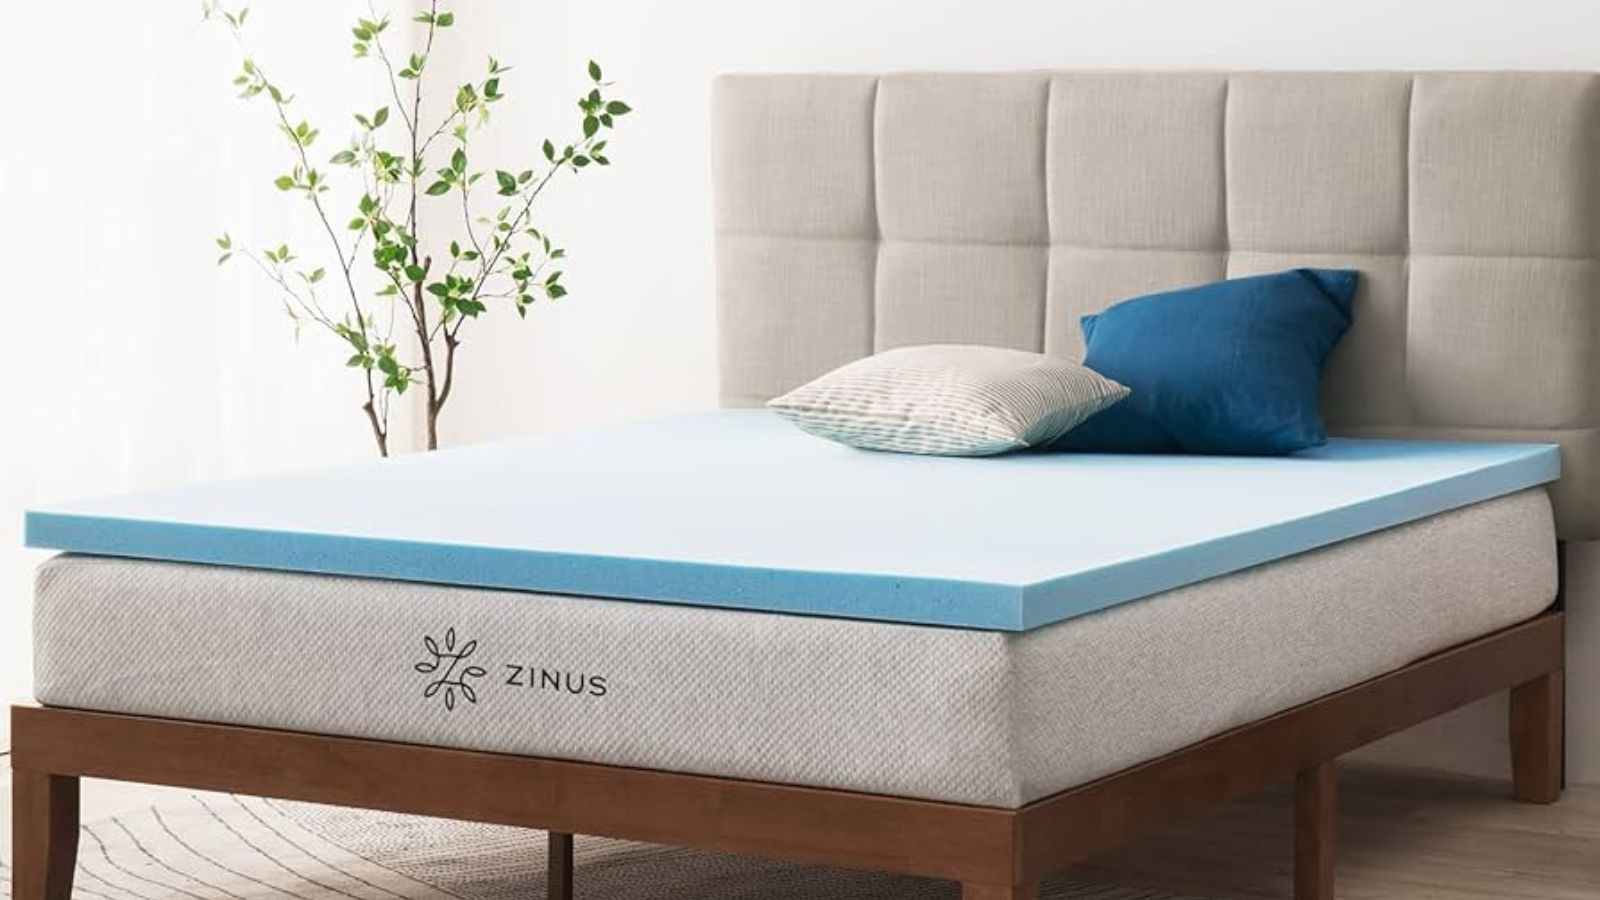 What you need to know before you buy a mattress topper